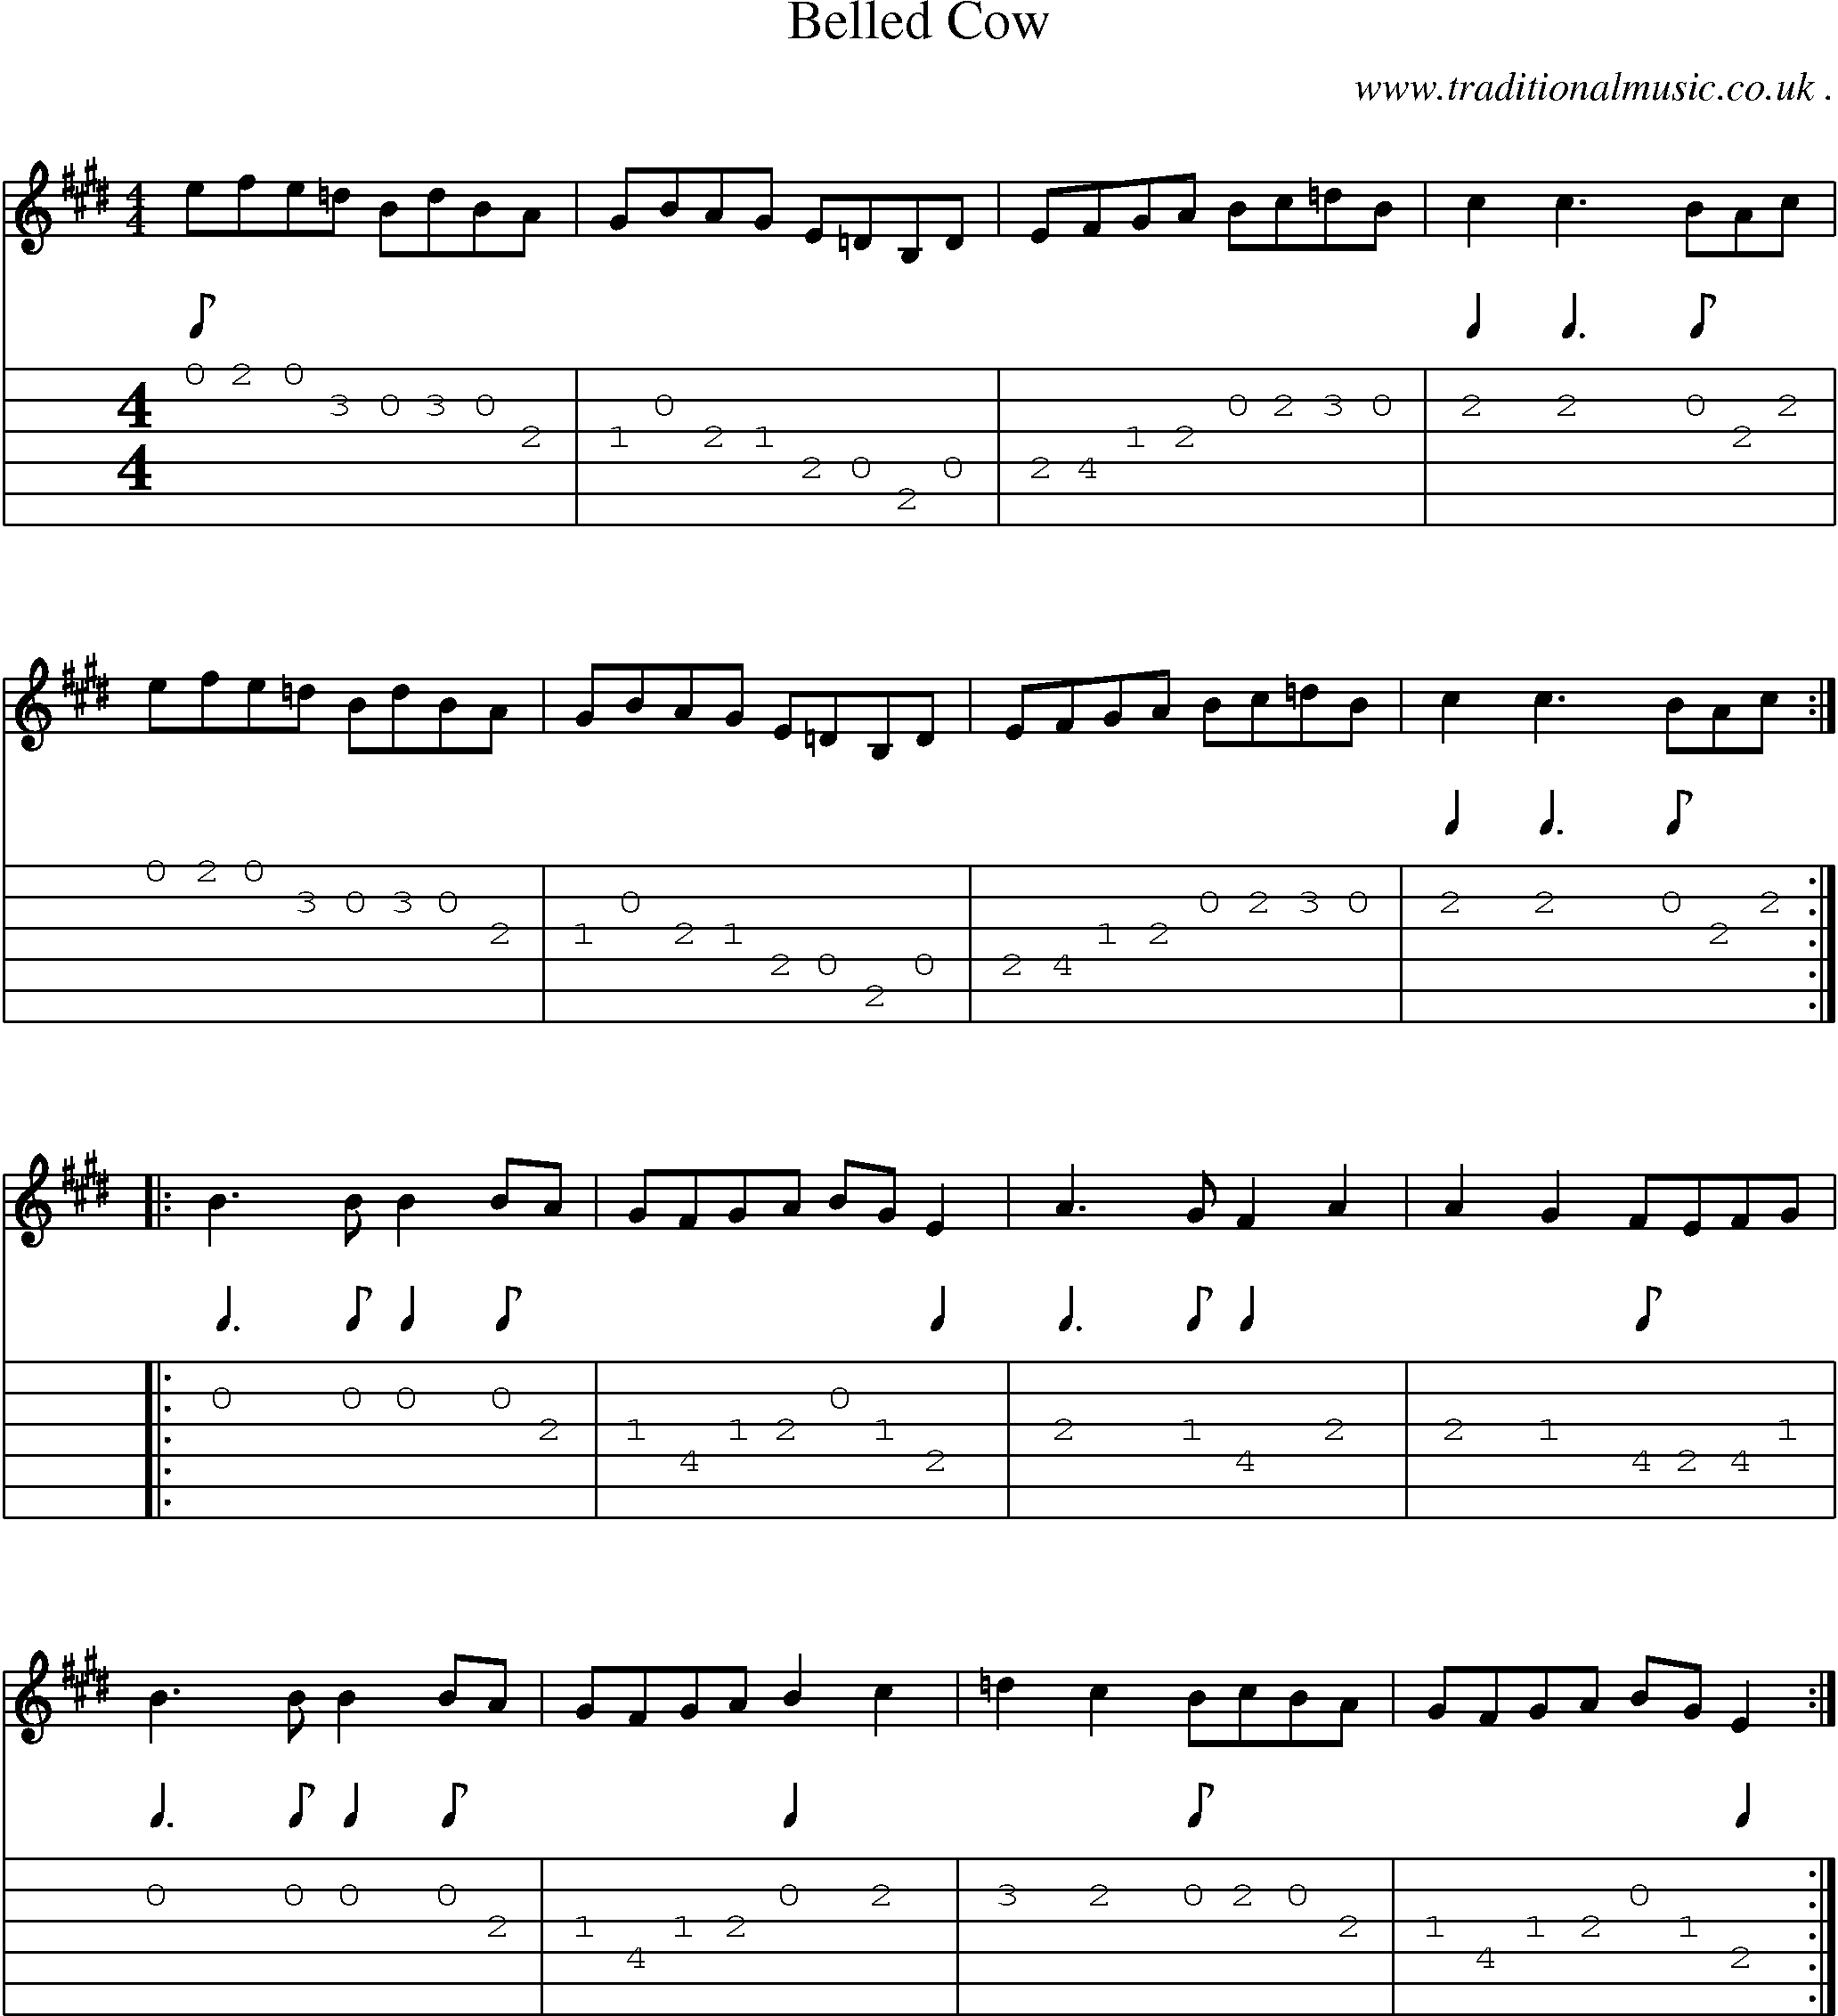 Music Score and Guitar Tabs for Belled Cow